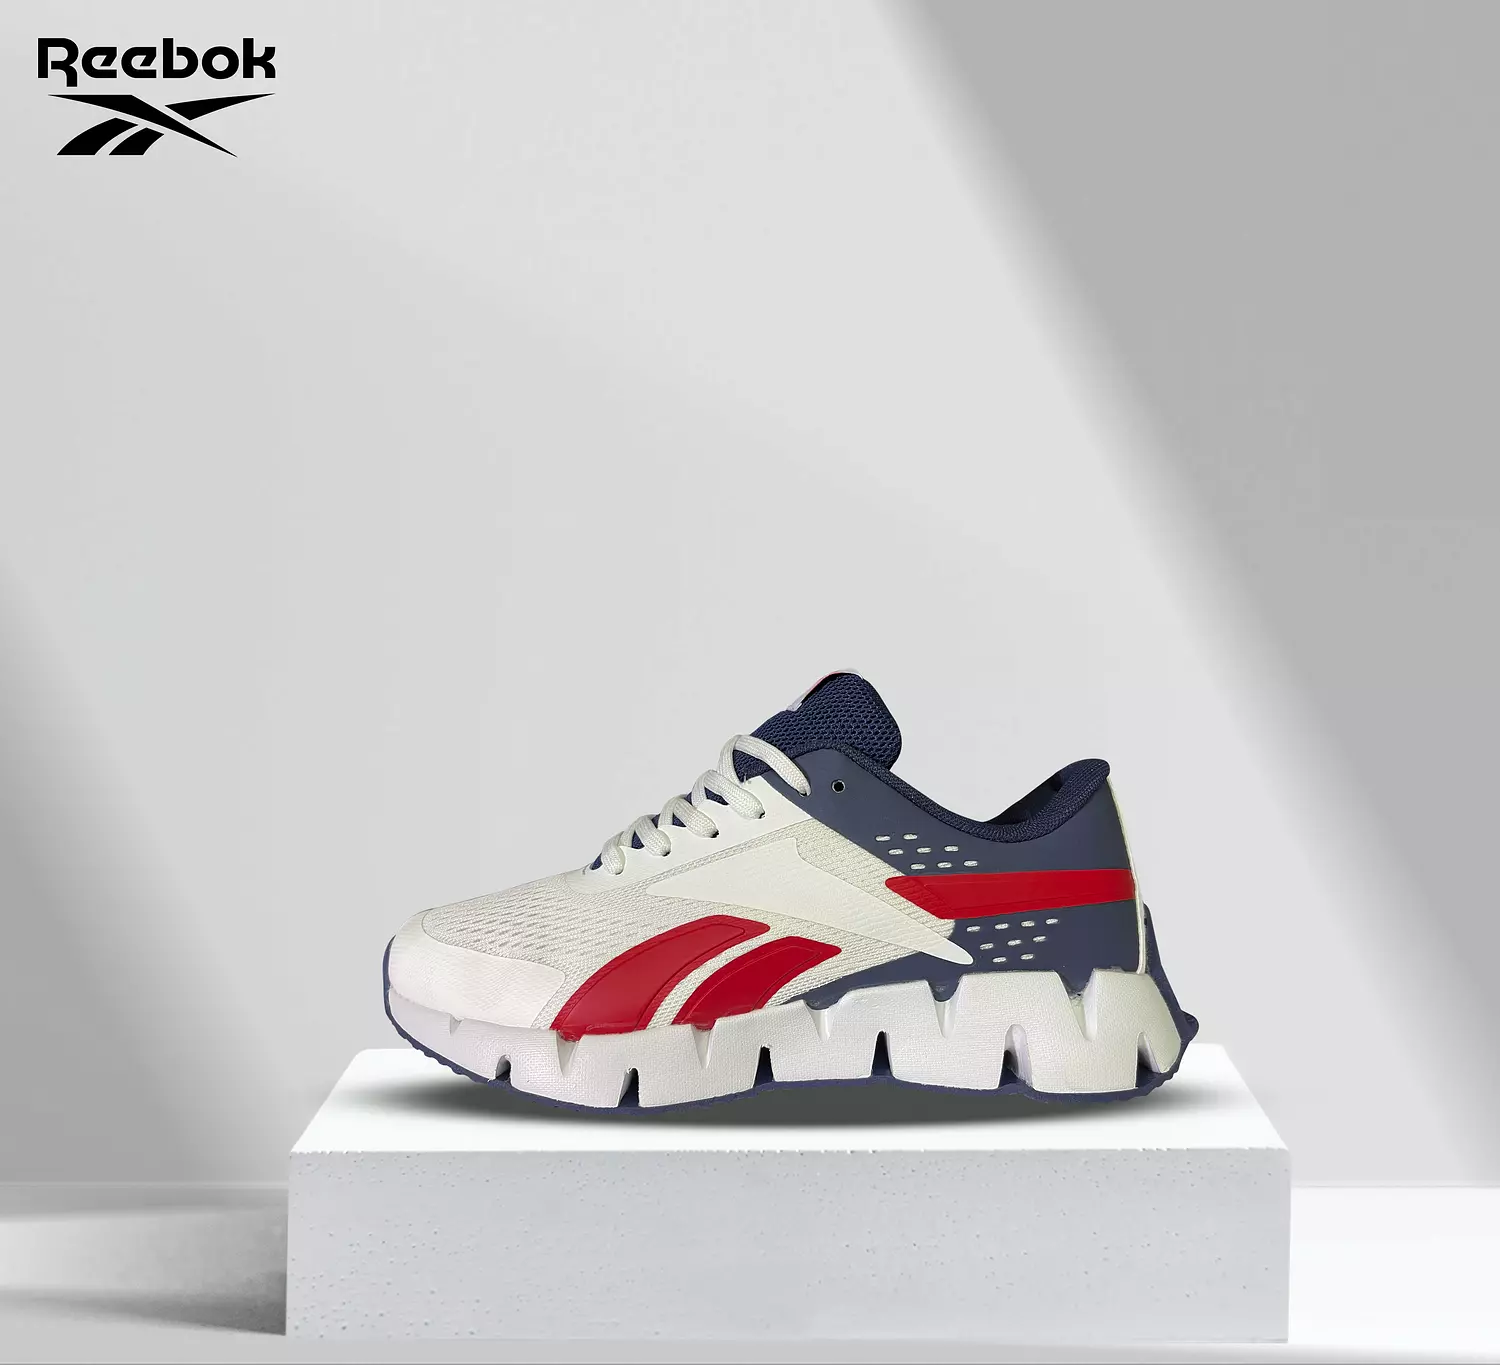 REEBOK RUNNING SHOES hover image